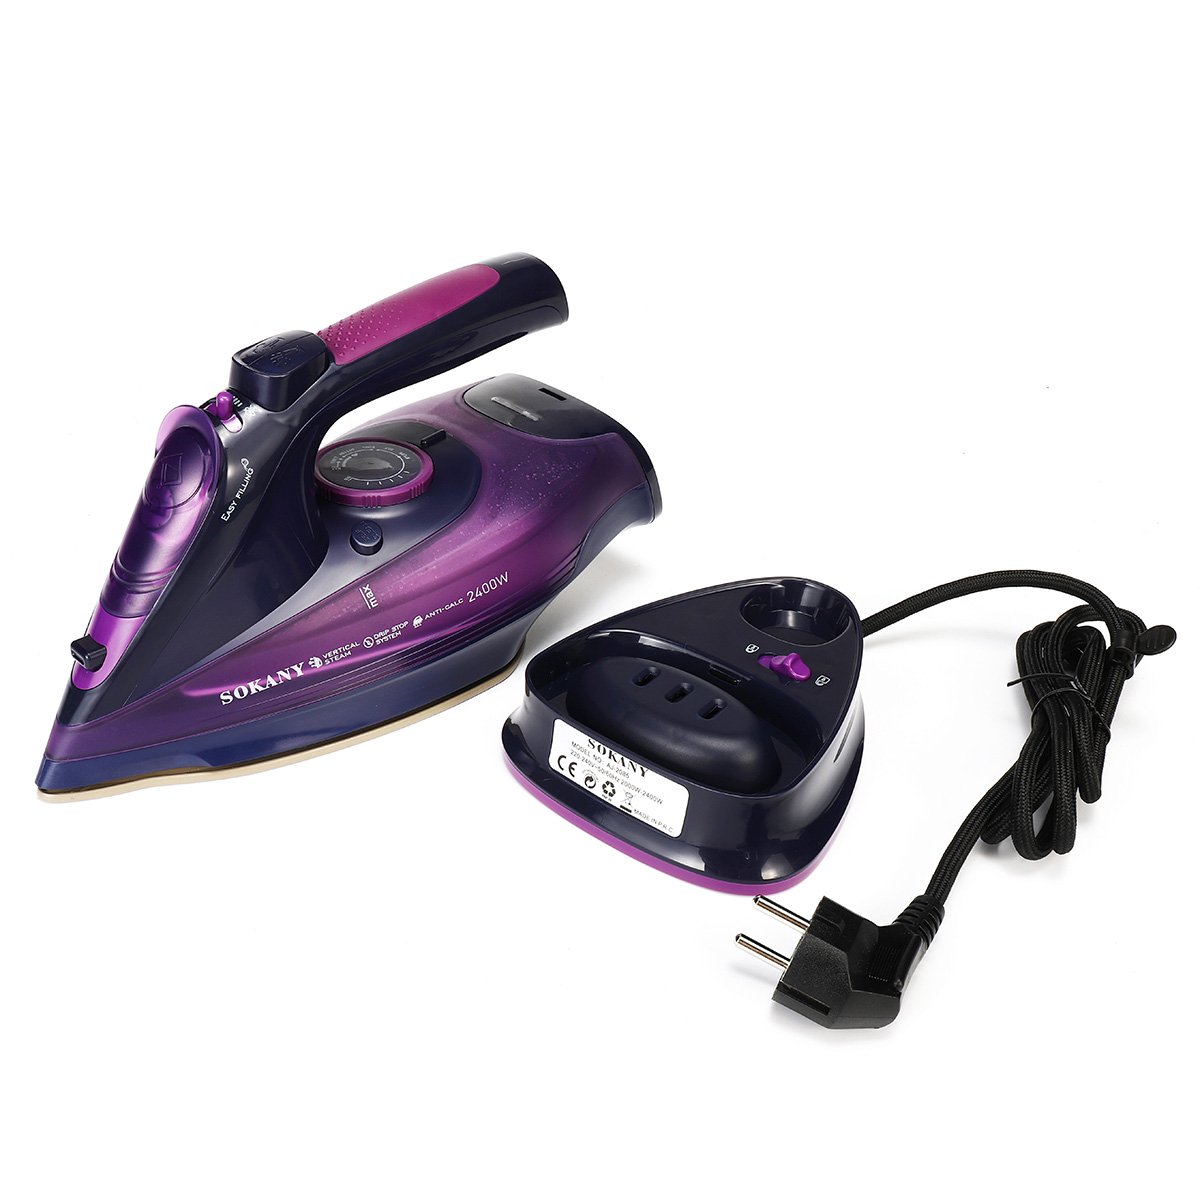 2400W-220V-Cordless-Steam-Iron-Multifunction-Clothes-Docking-Station-Dry-Ironing-Industry-1346803-9